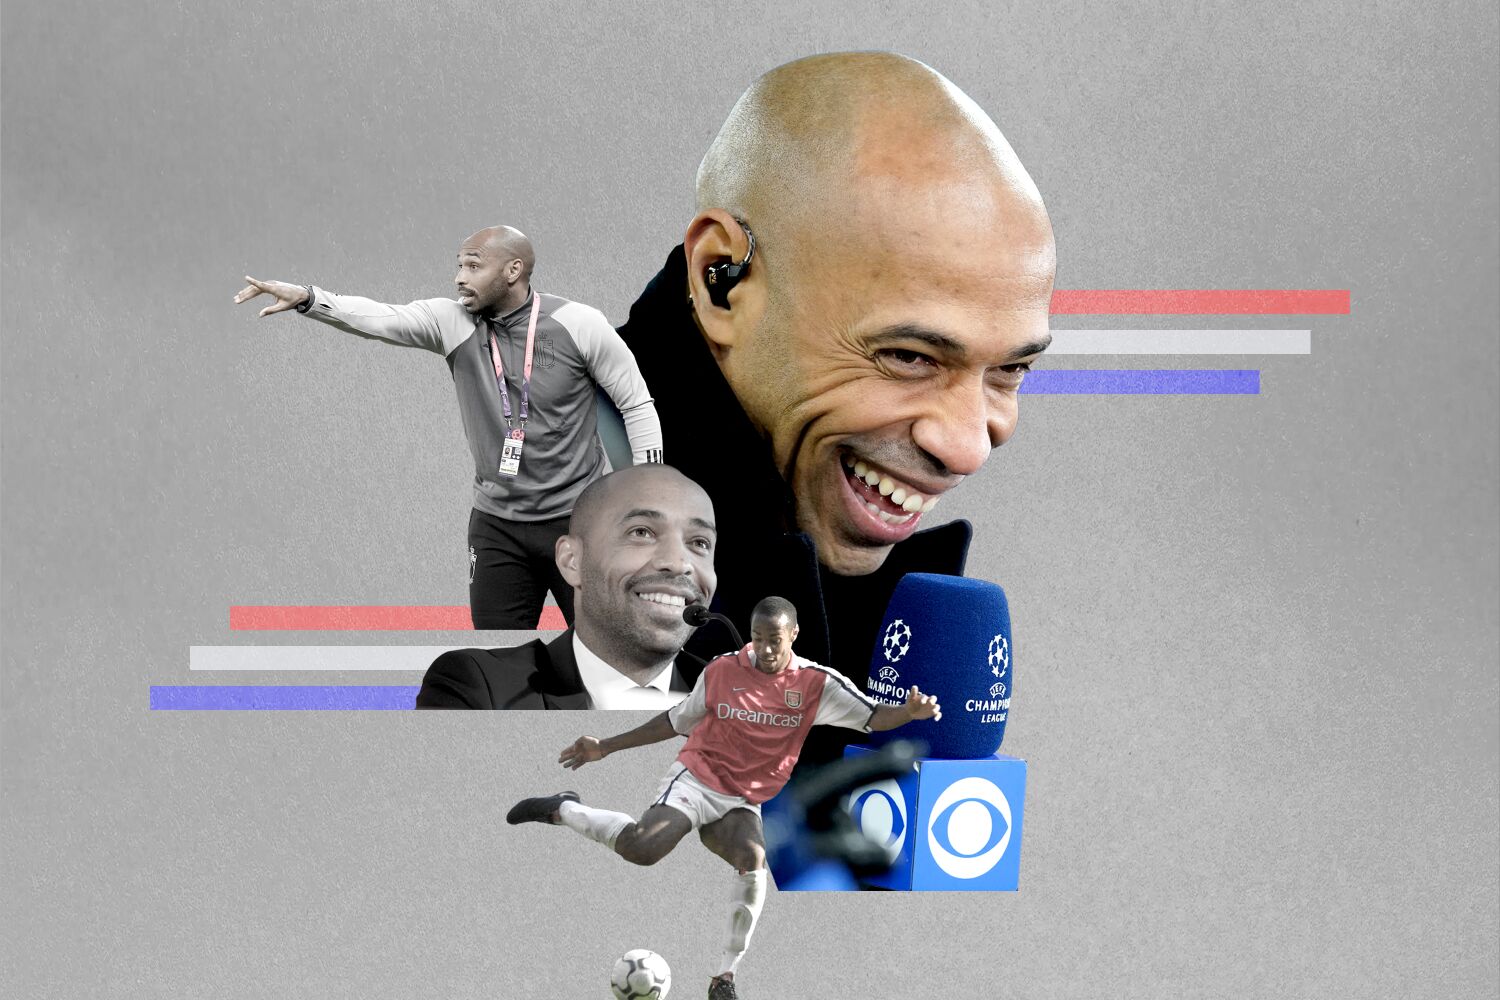 'Can I even win?' Thierry Henry waits for a phone call and another shot at coaching